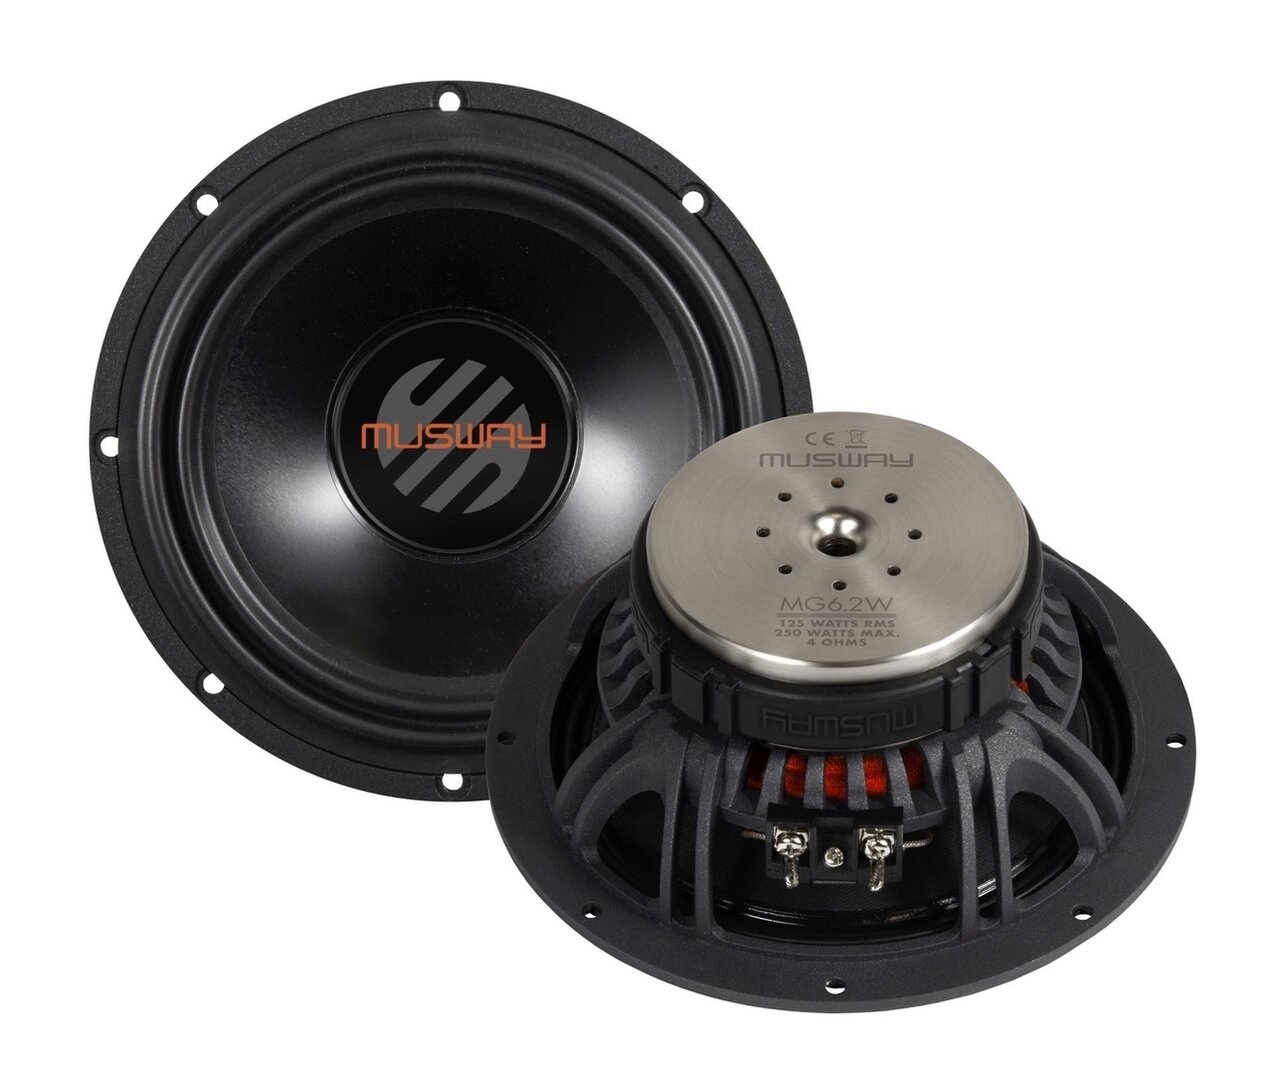 Musway MG6.2W - High end midwoofer set - 16,5 cm - 125 watts RMS - 4 Ohms